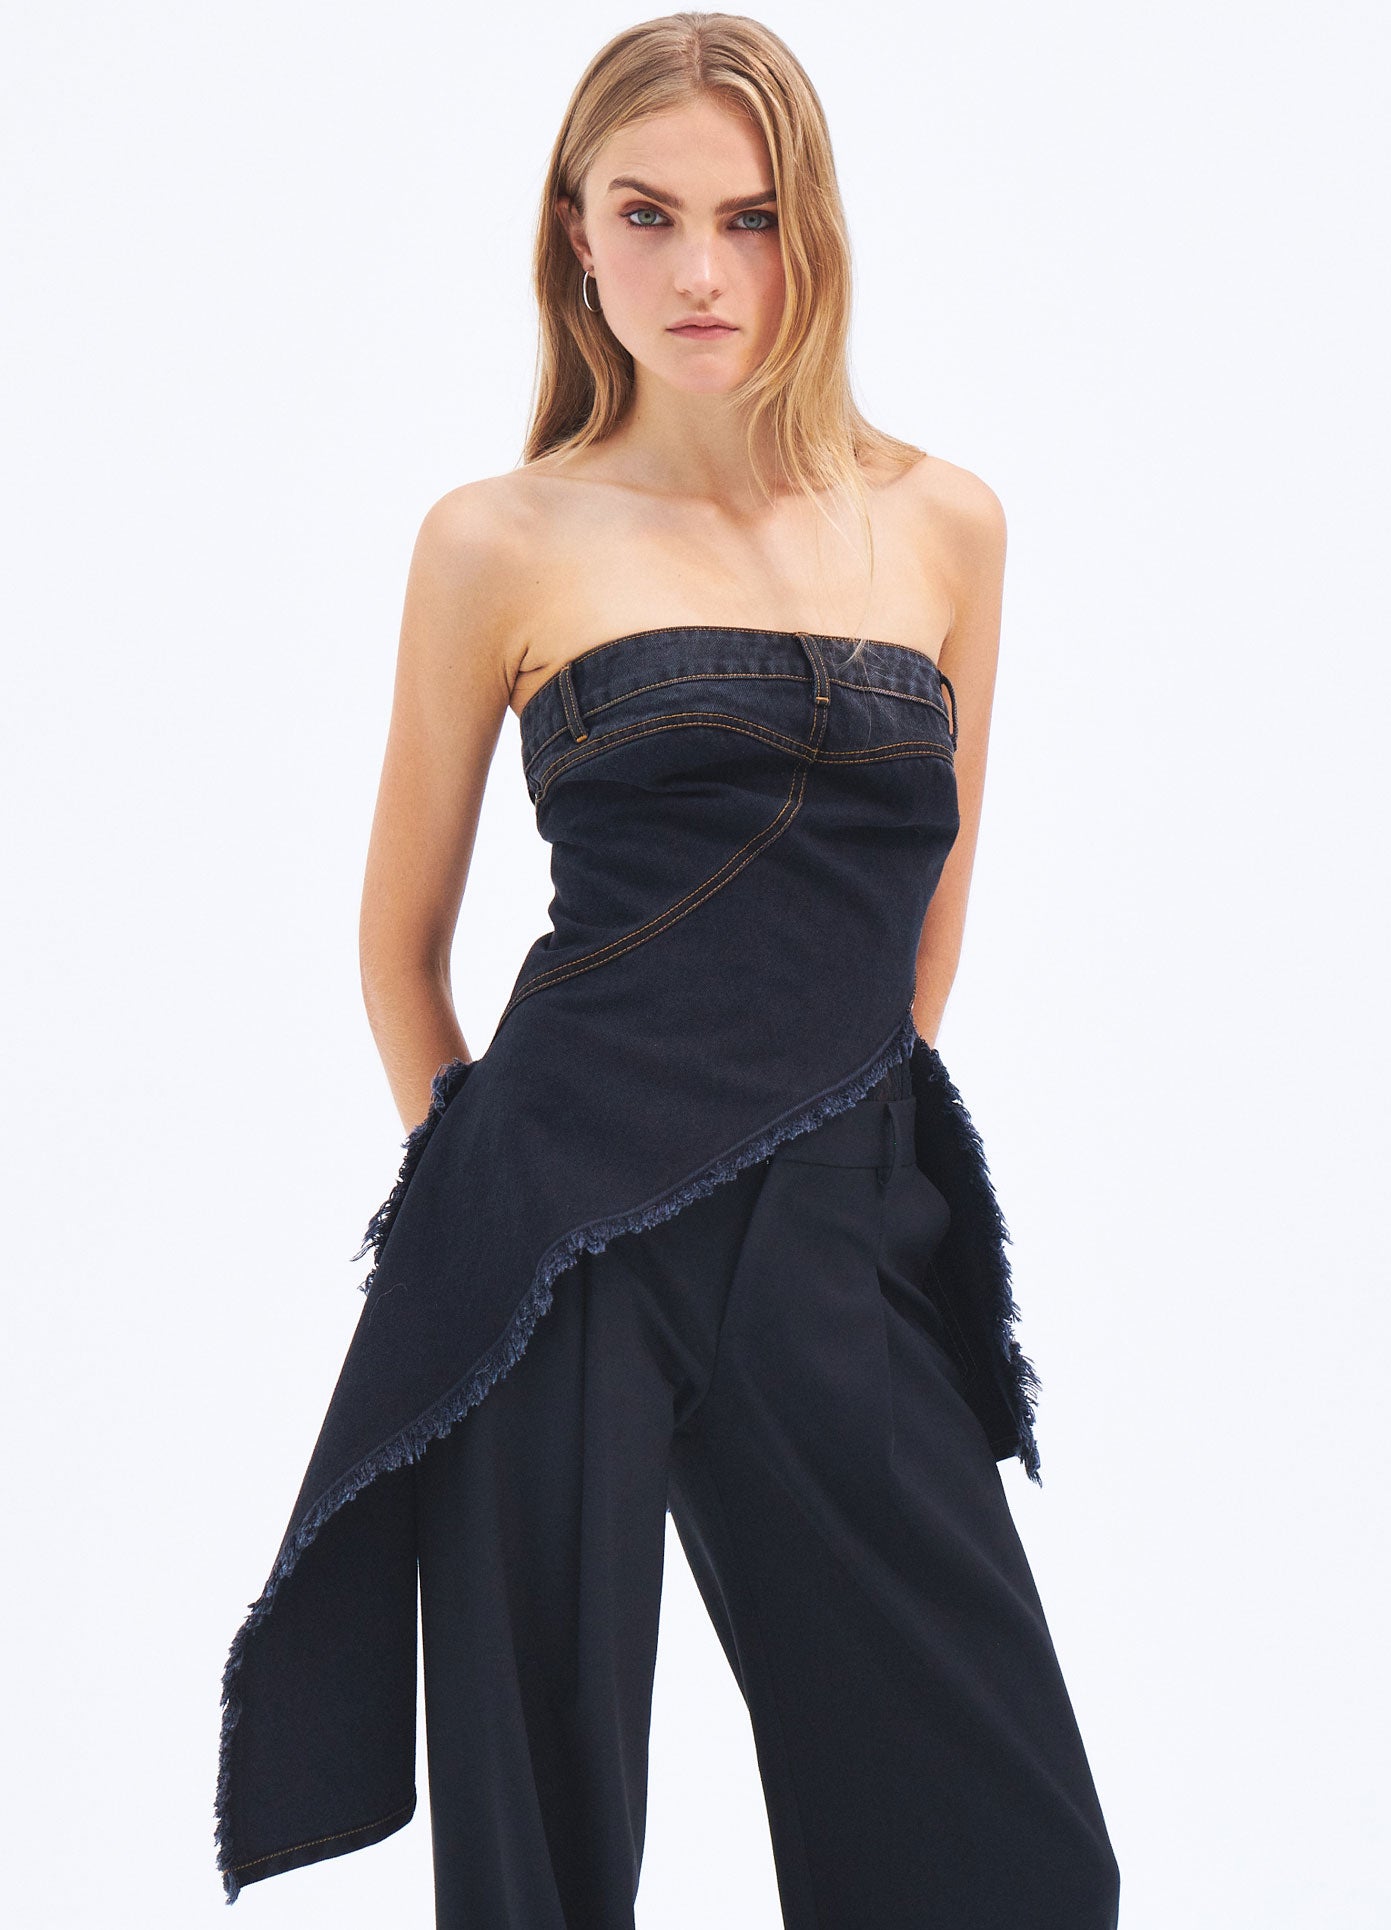 MONSE Spring 2024 Twisted Denim Top in Black on model full front view